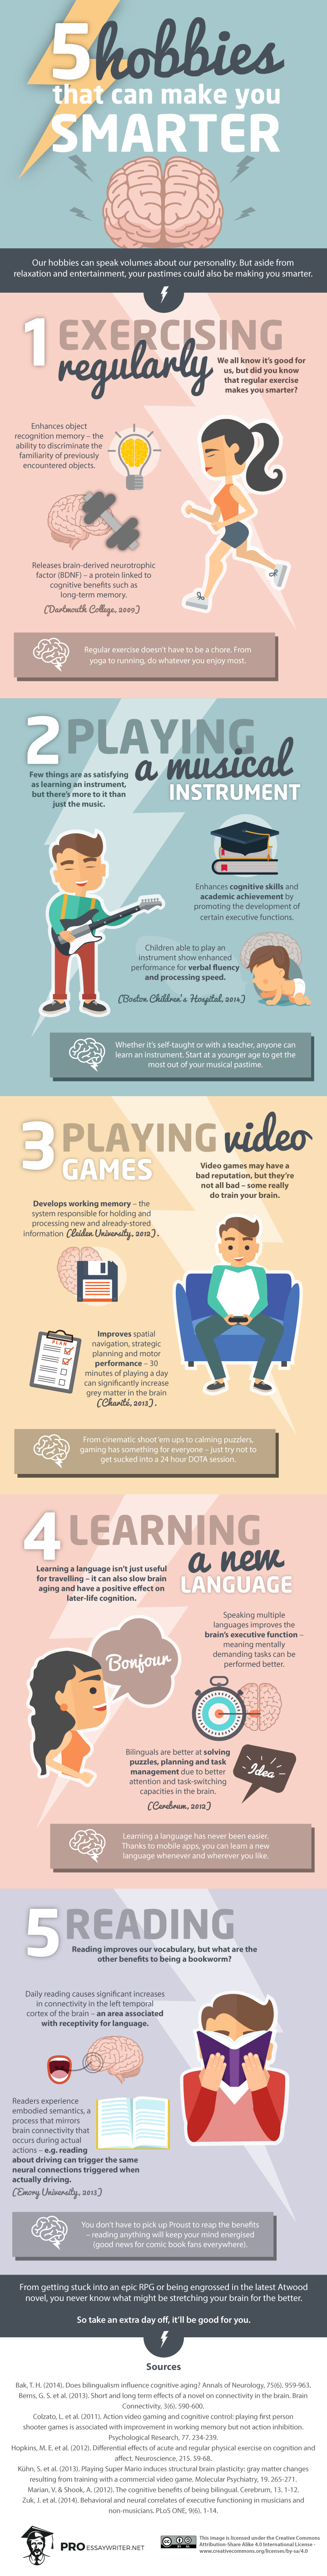 5-hobbies-that-can-make-you-smarter